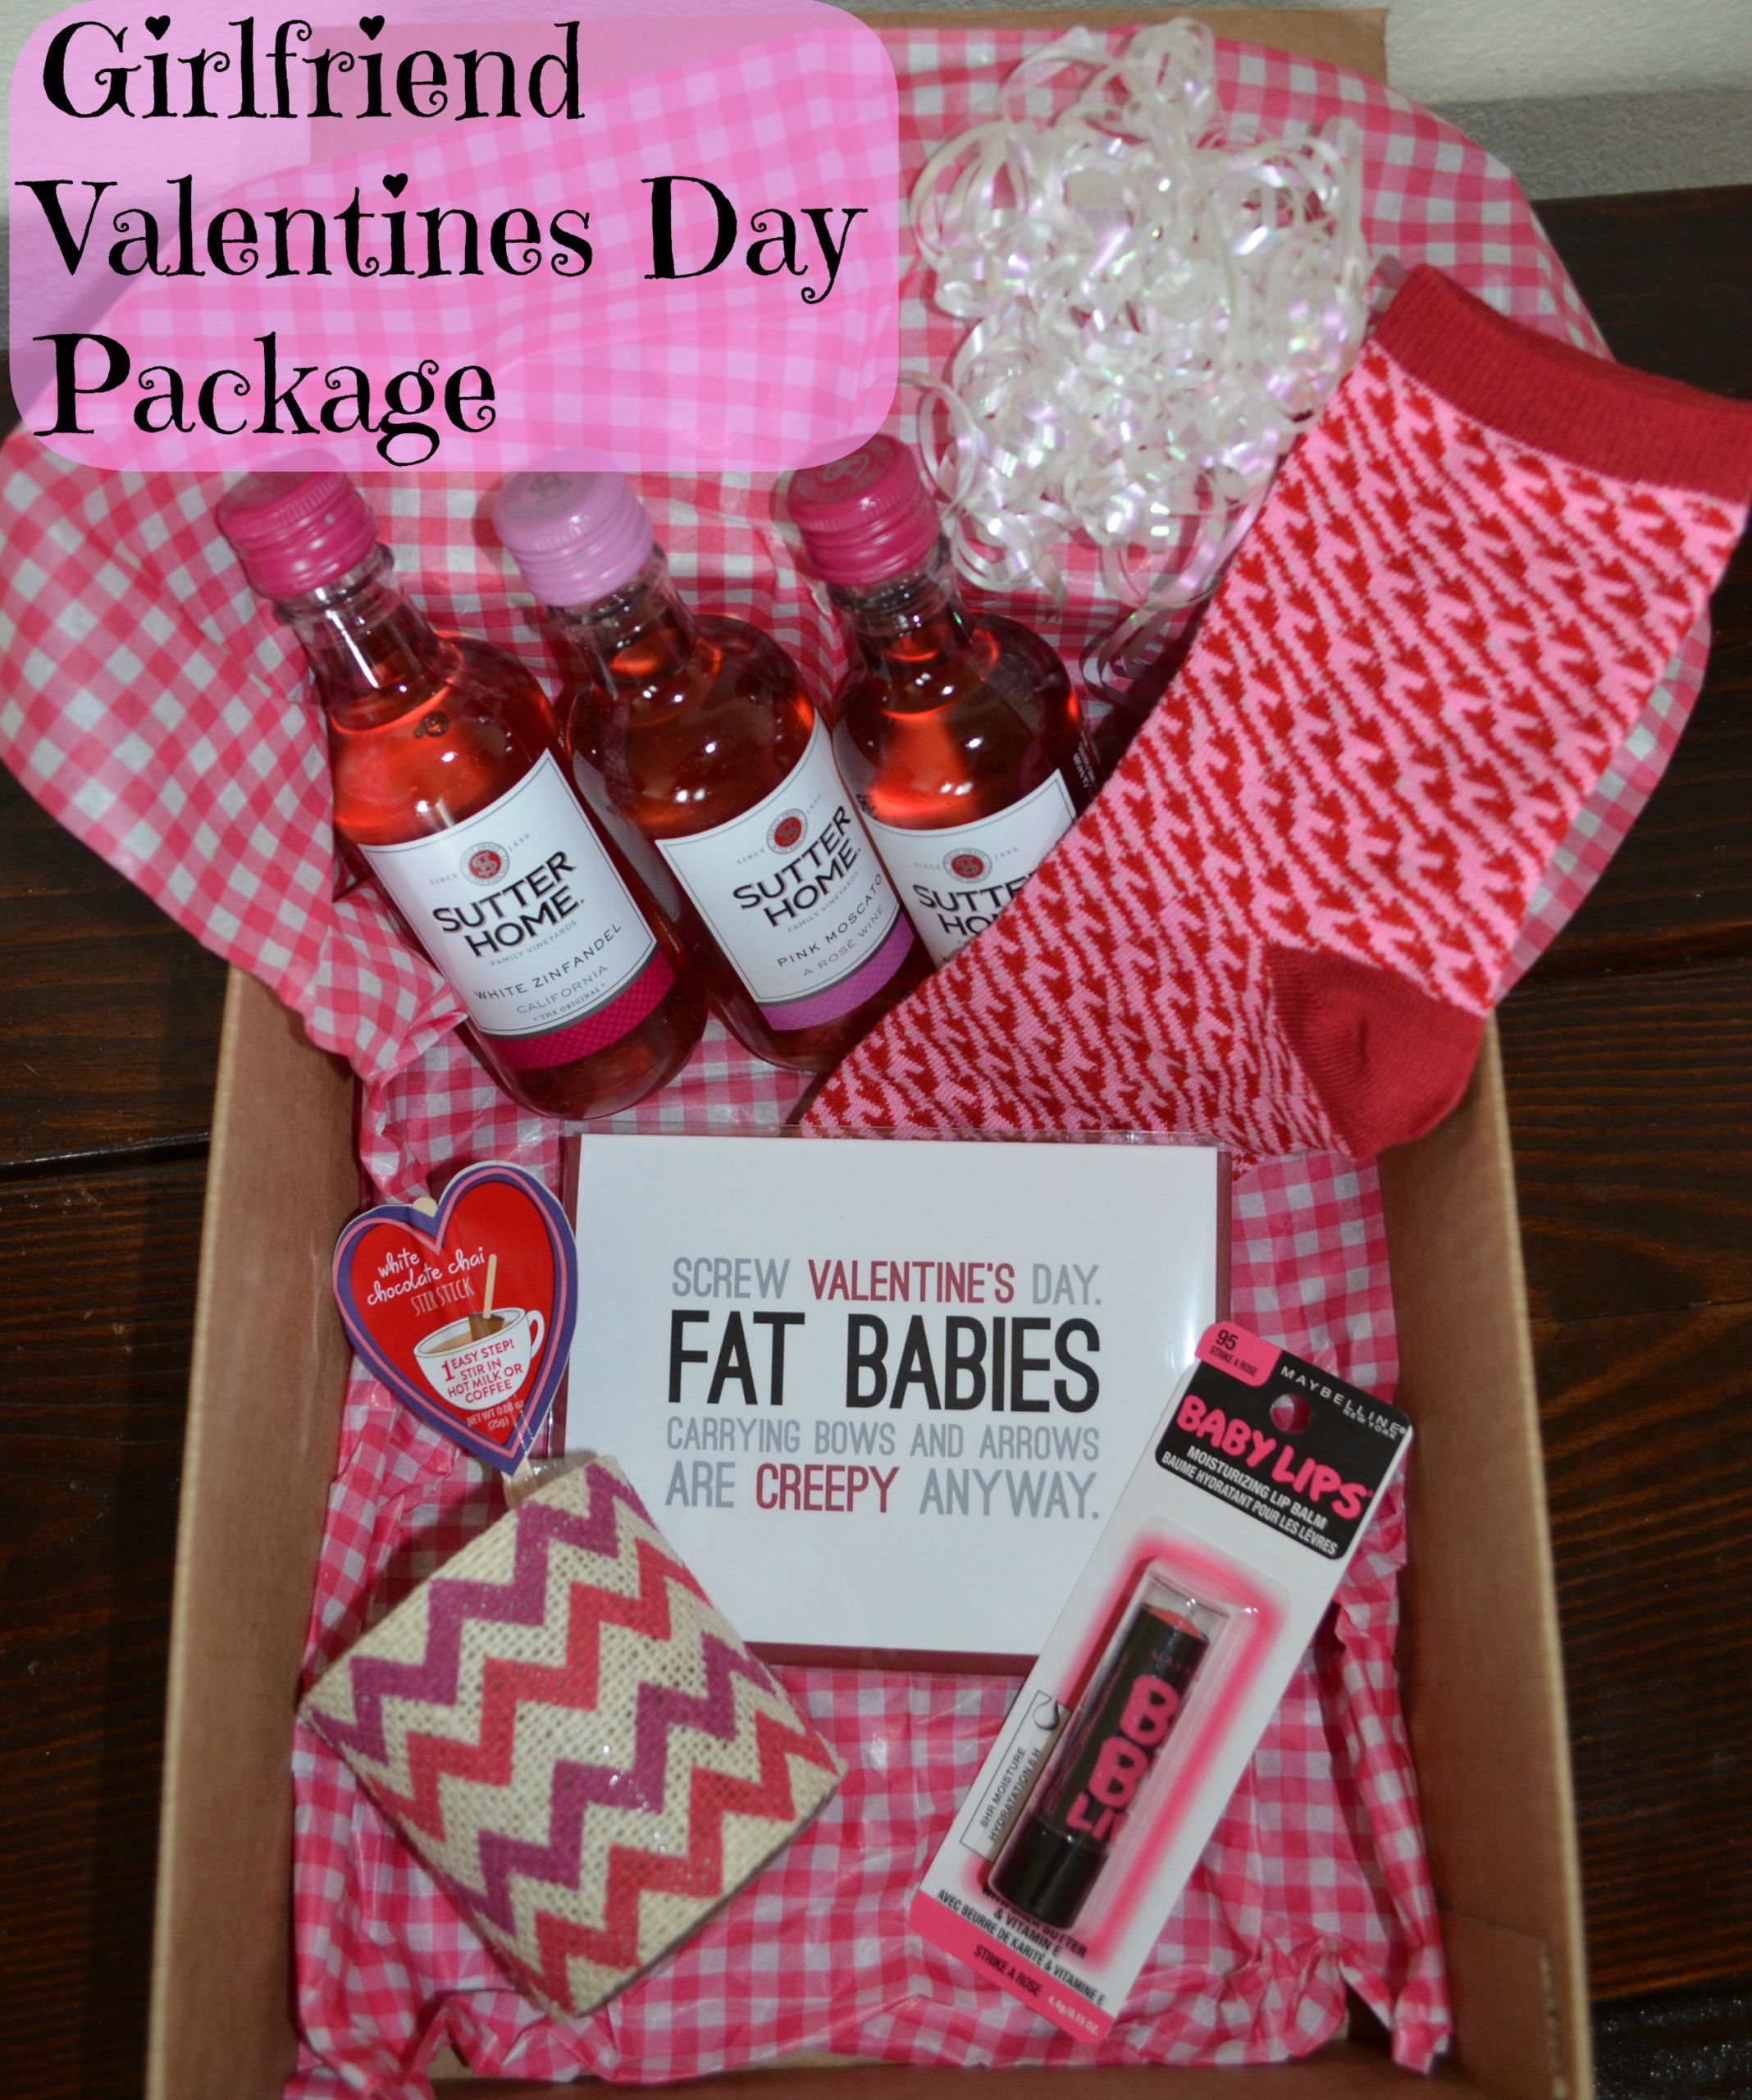 Valentines Gift Ideas For Girlfriend
 24 ADORABLE GIFT IDEAS FOR THE WOMEN IN YOUR LIFE